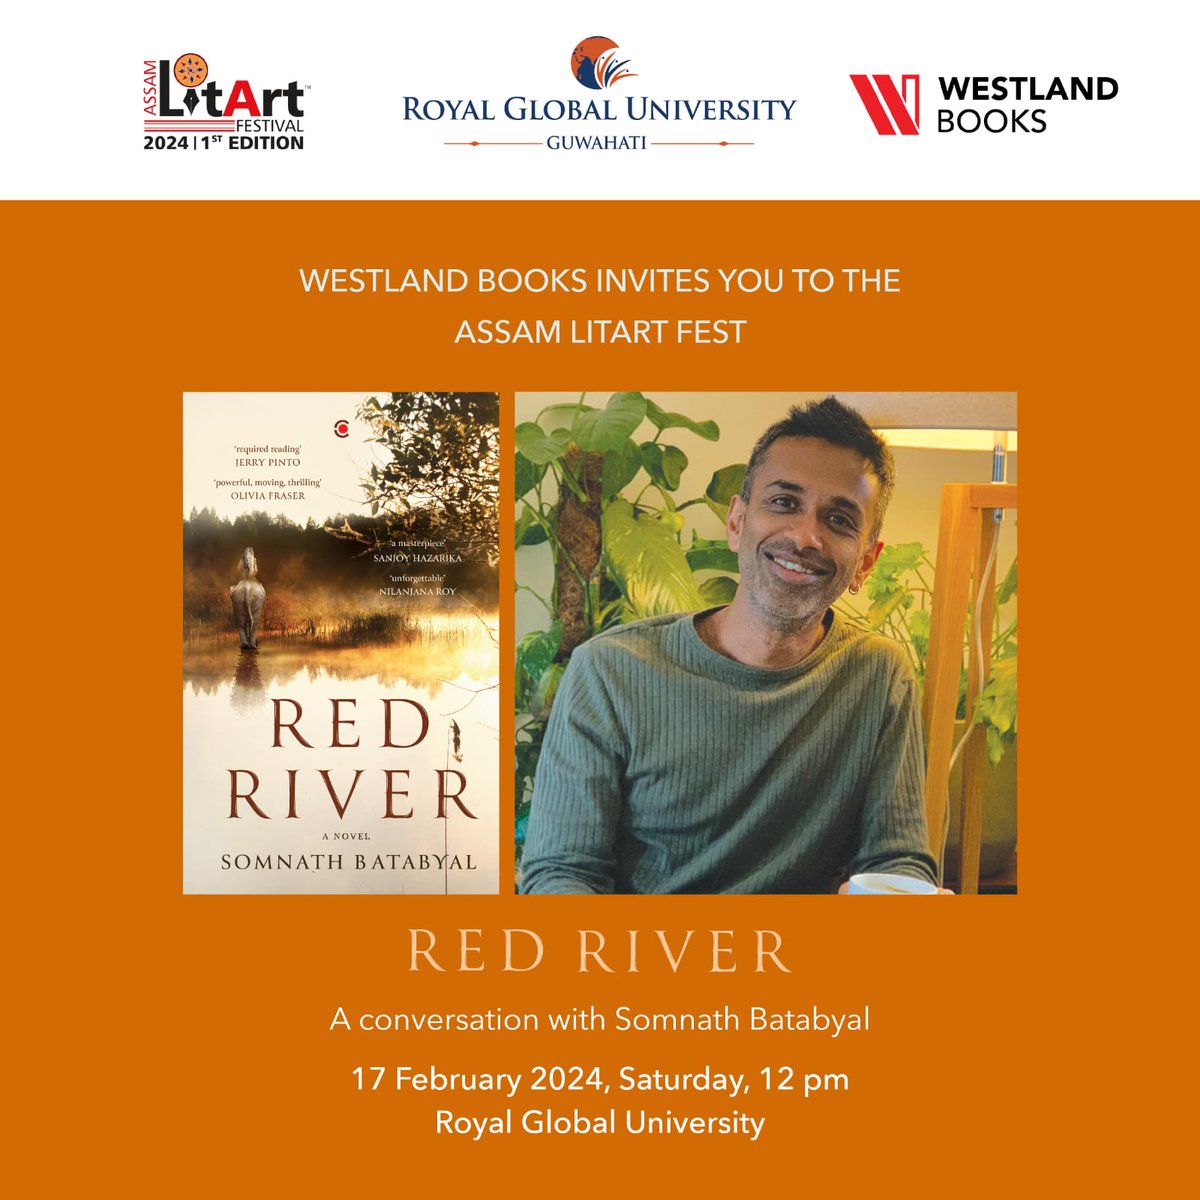 Team Assam LitArt Fest is proud to share @WestlandBooks's invitation to all to the very first edition of Assam LitArt Fest!

We are on cloud nine to be hosting @sombatabyal , author of the latest bestseller Red River as our Star Speaker. 

#assamlitartfest2024 #Guwahati #Assam